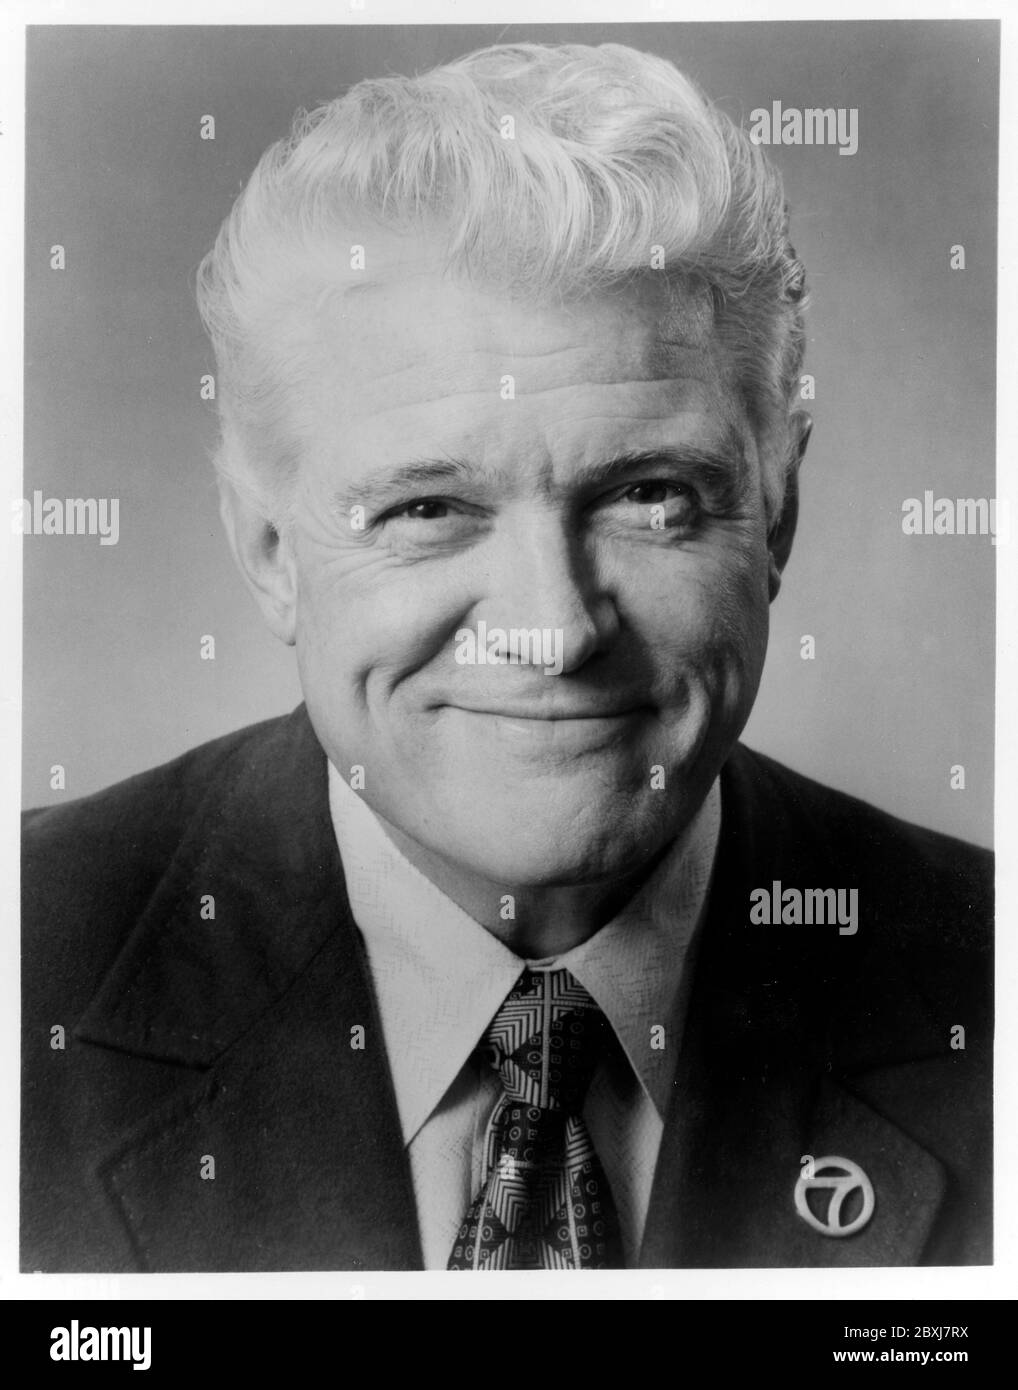 Portrait of television newsman Jerry Dunphy . Stock Photo